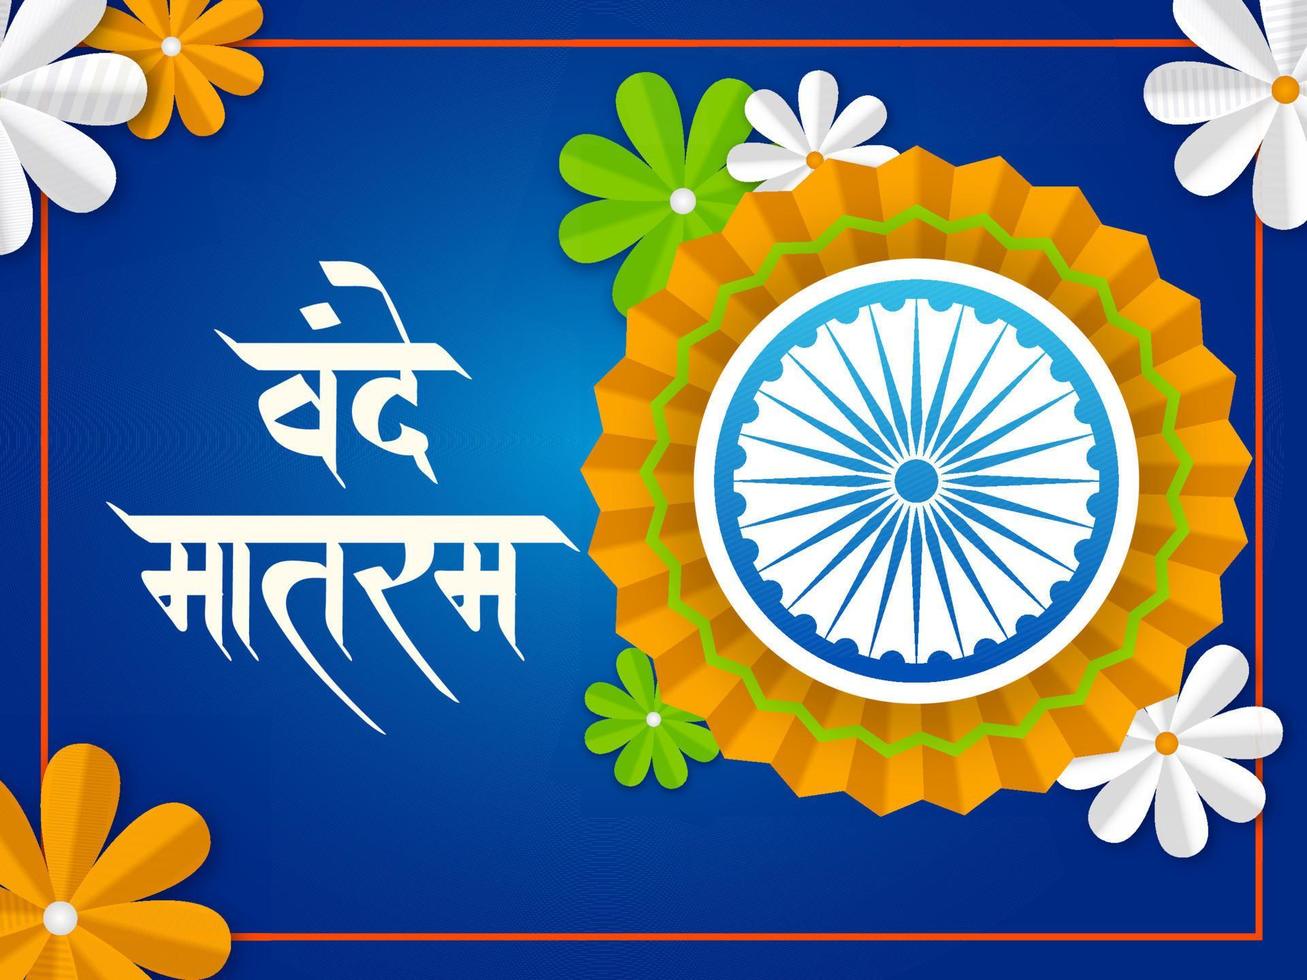 Hindi Text Vande Mataram with India Flag Paper Badge and Flowers Decorated on Blue Background. vector